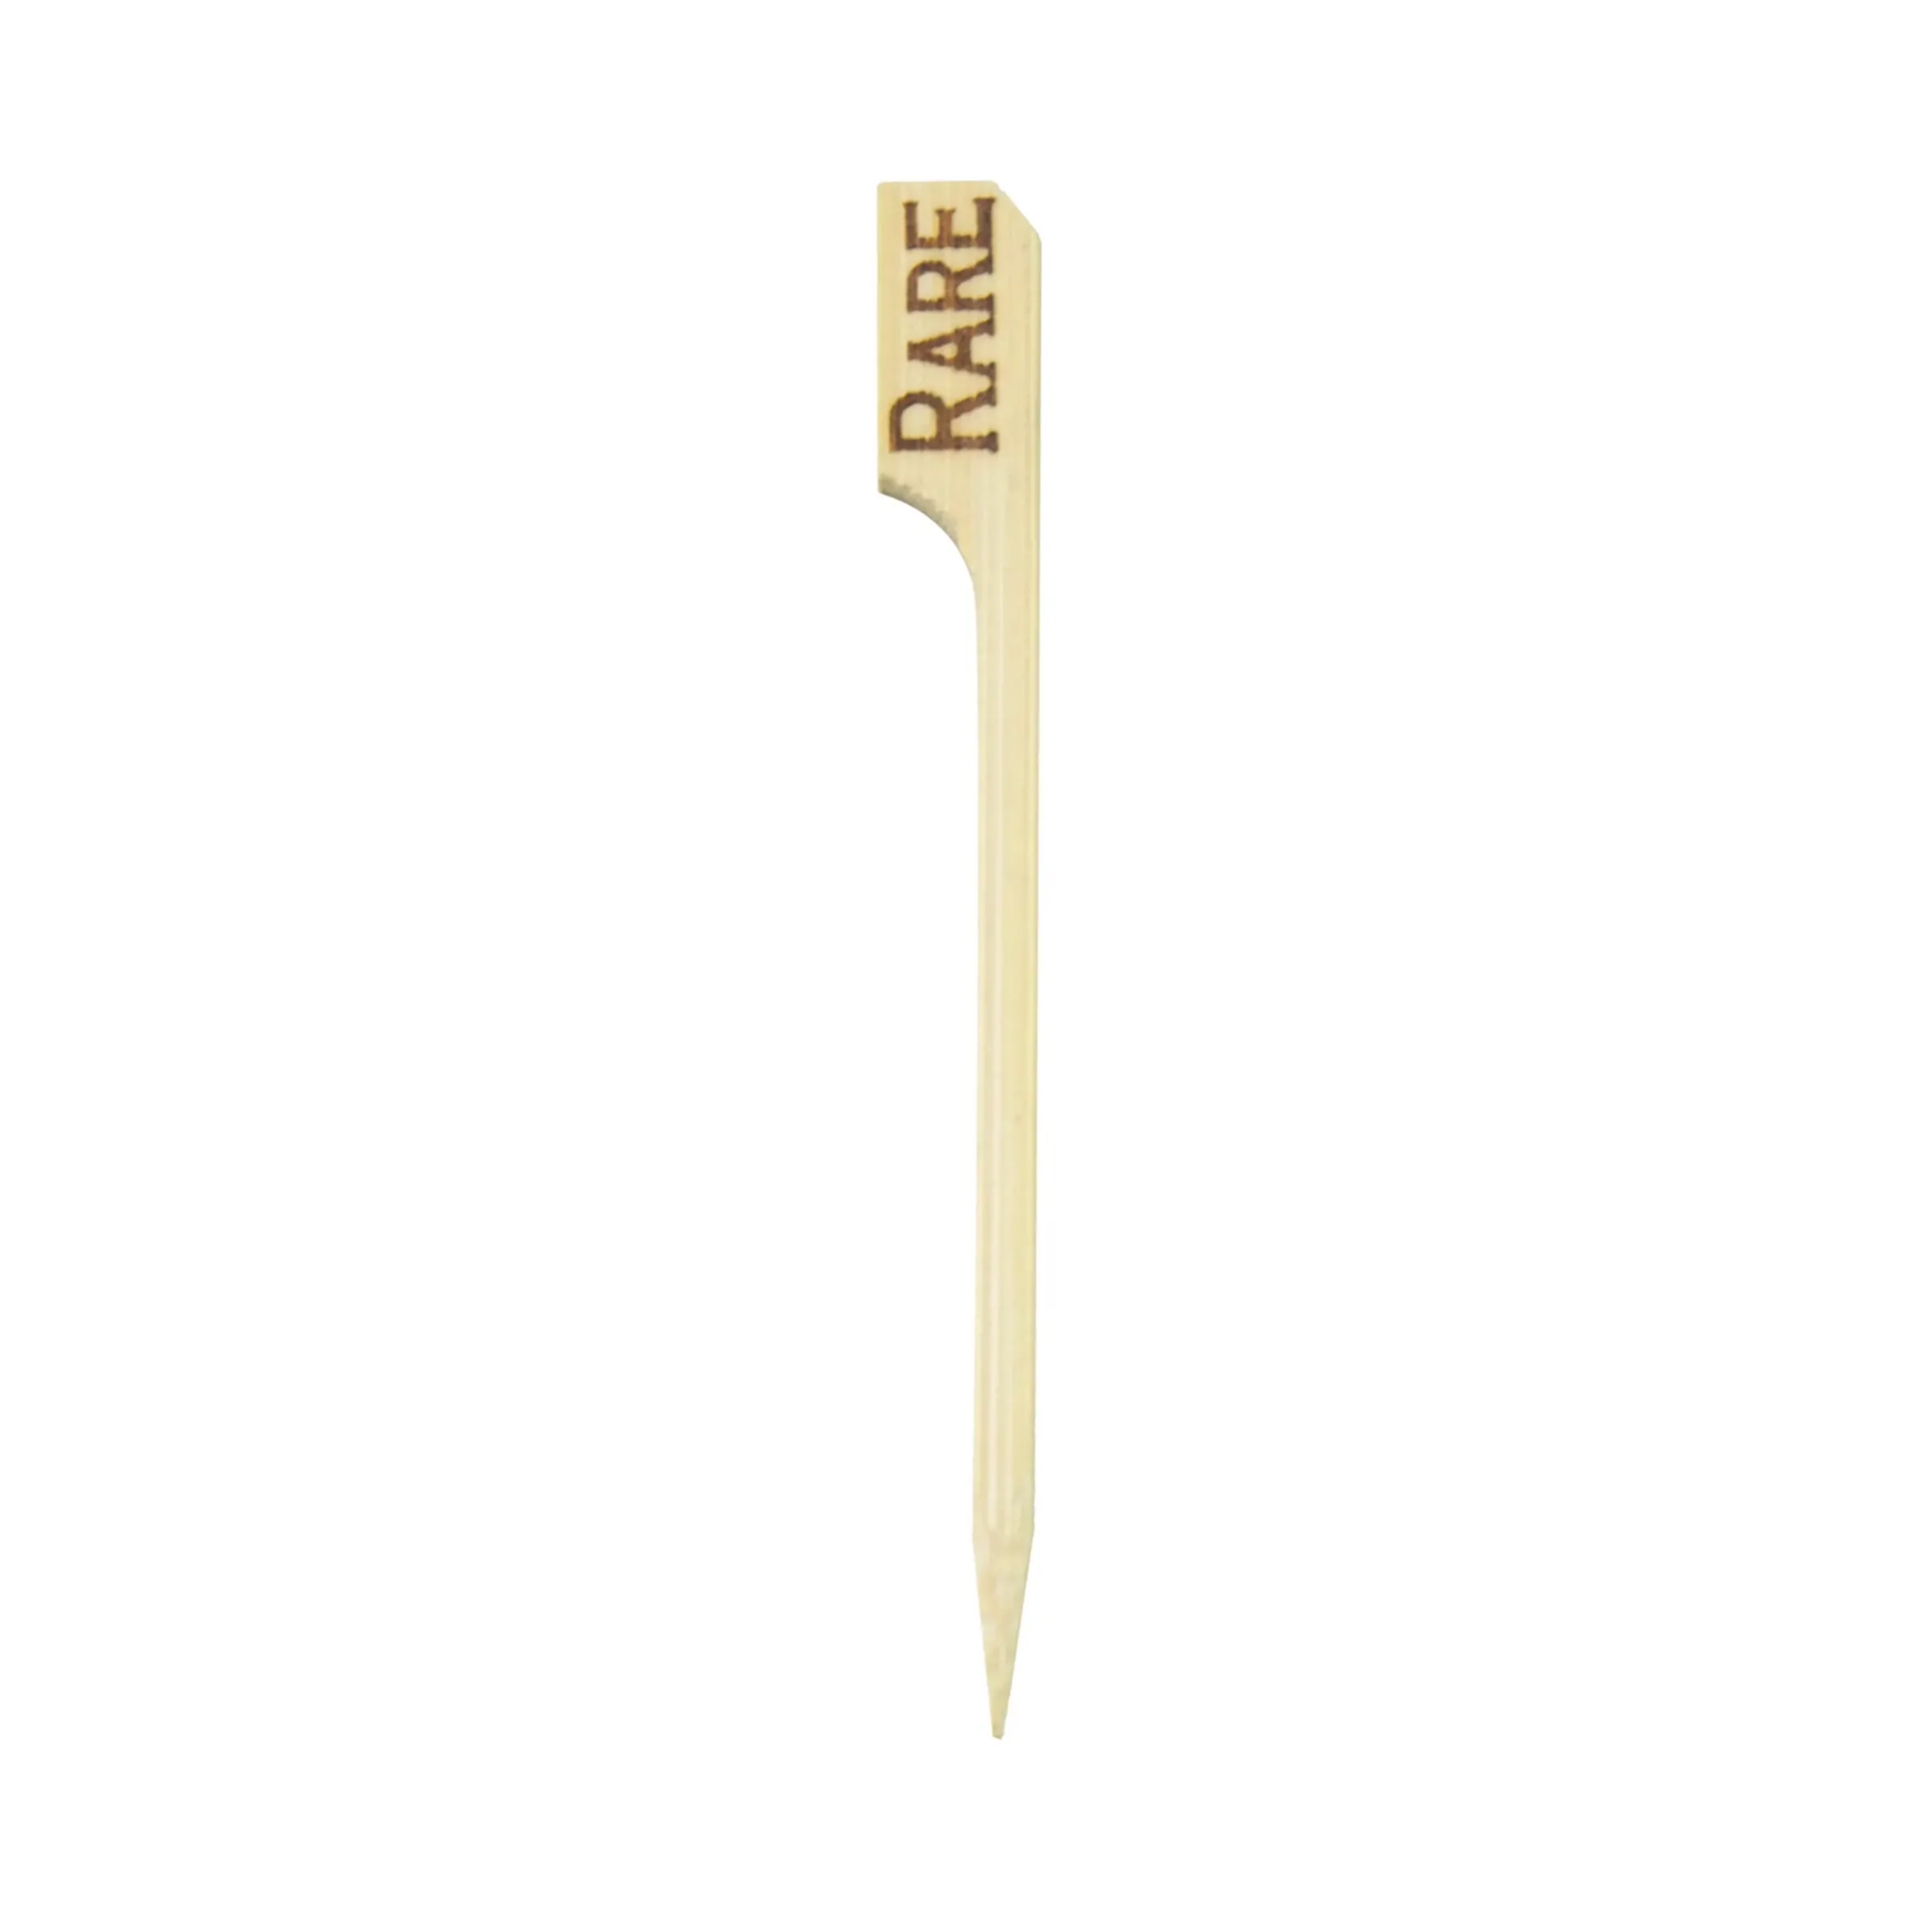 A skewer with a paddle shaped end labelled 